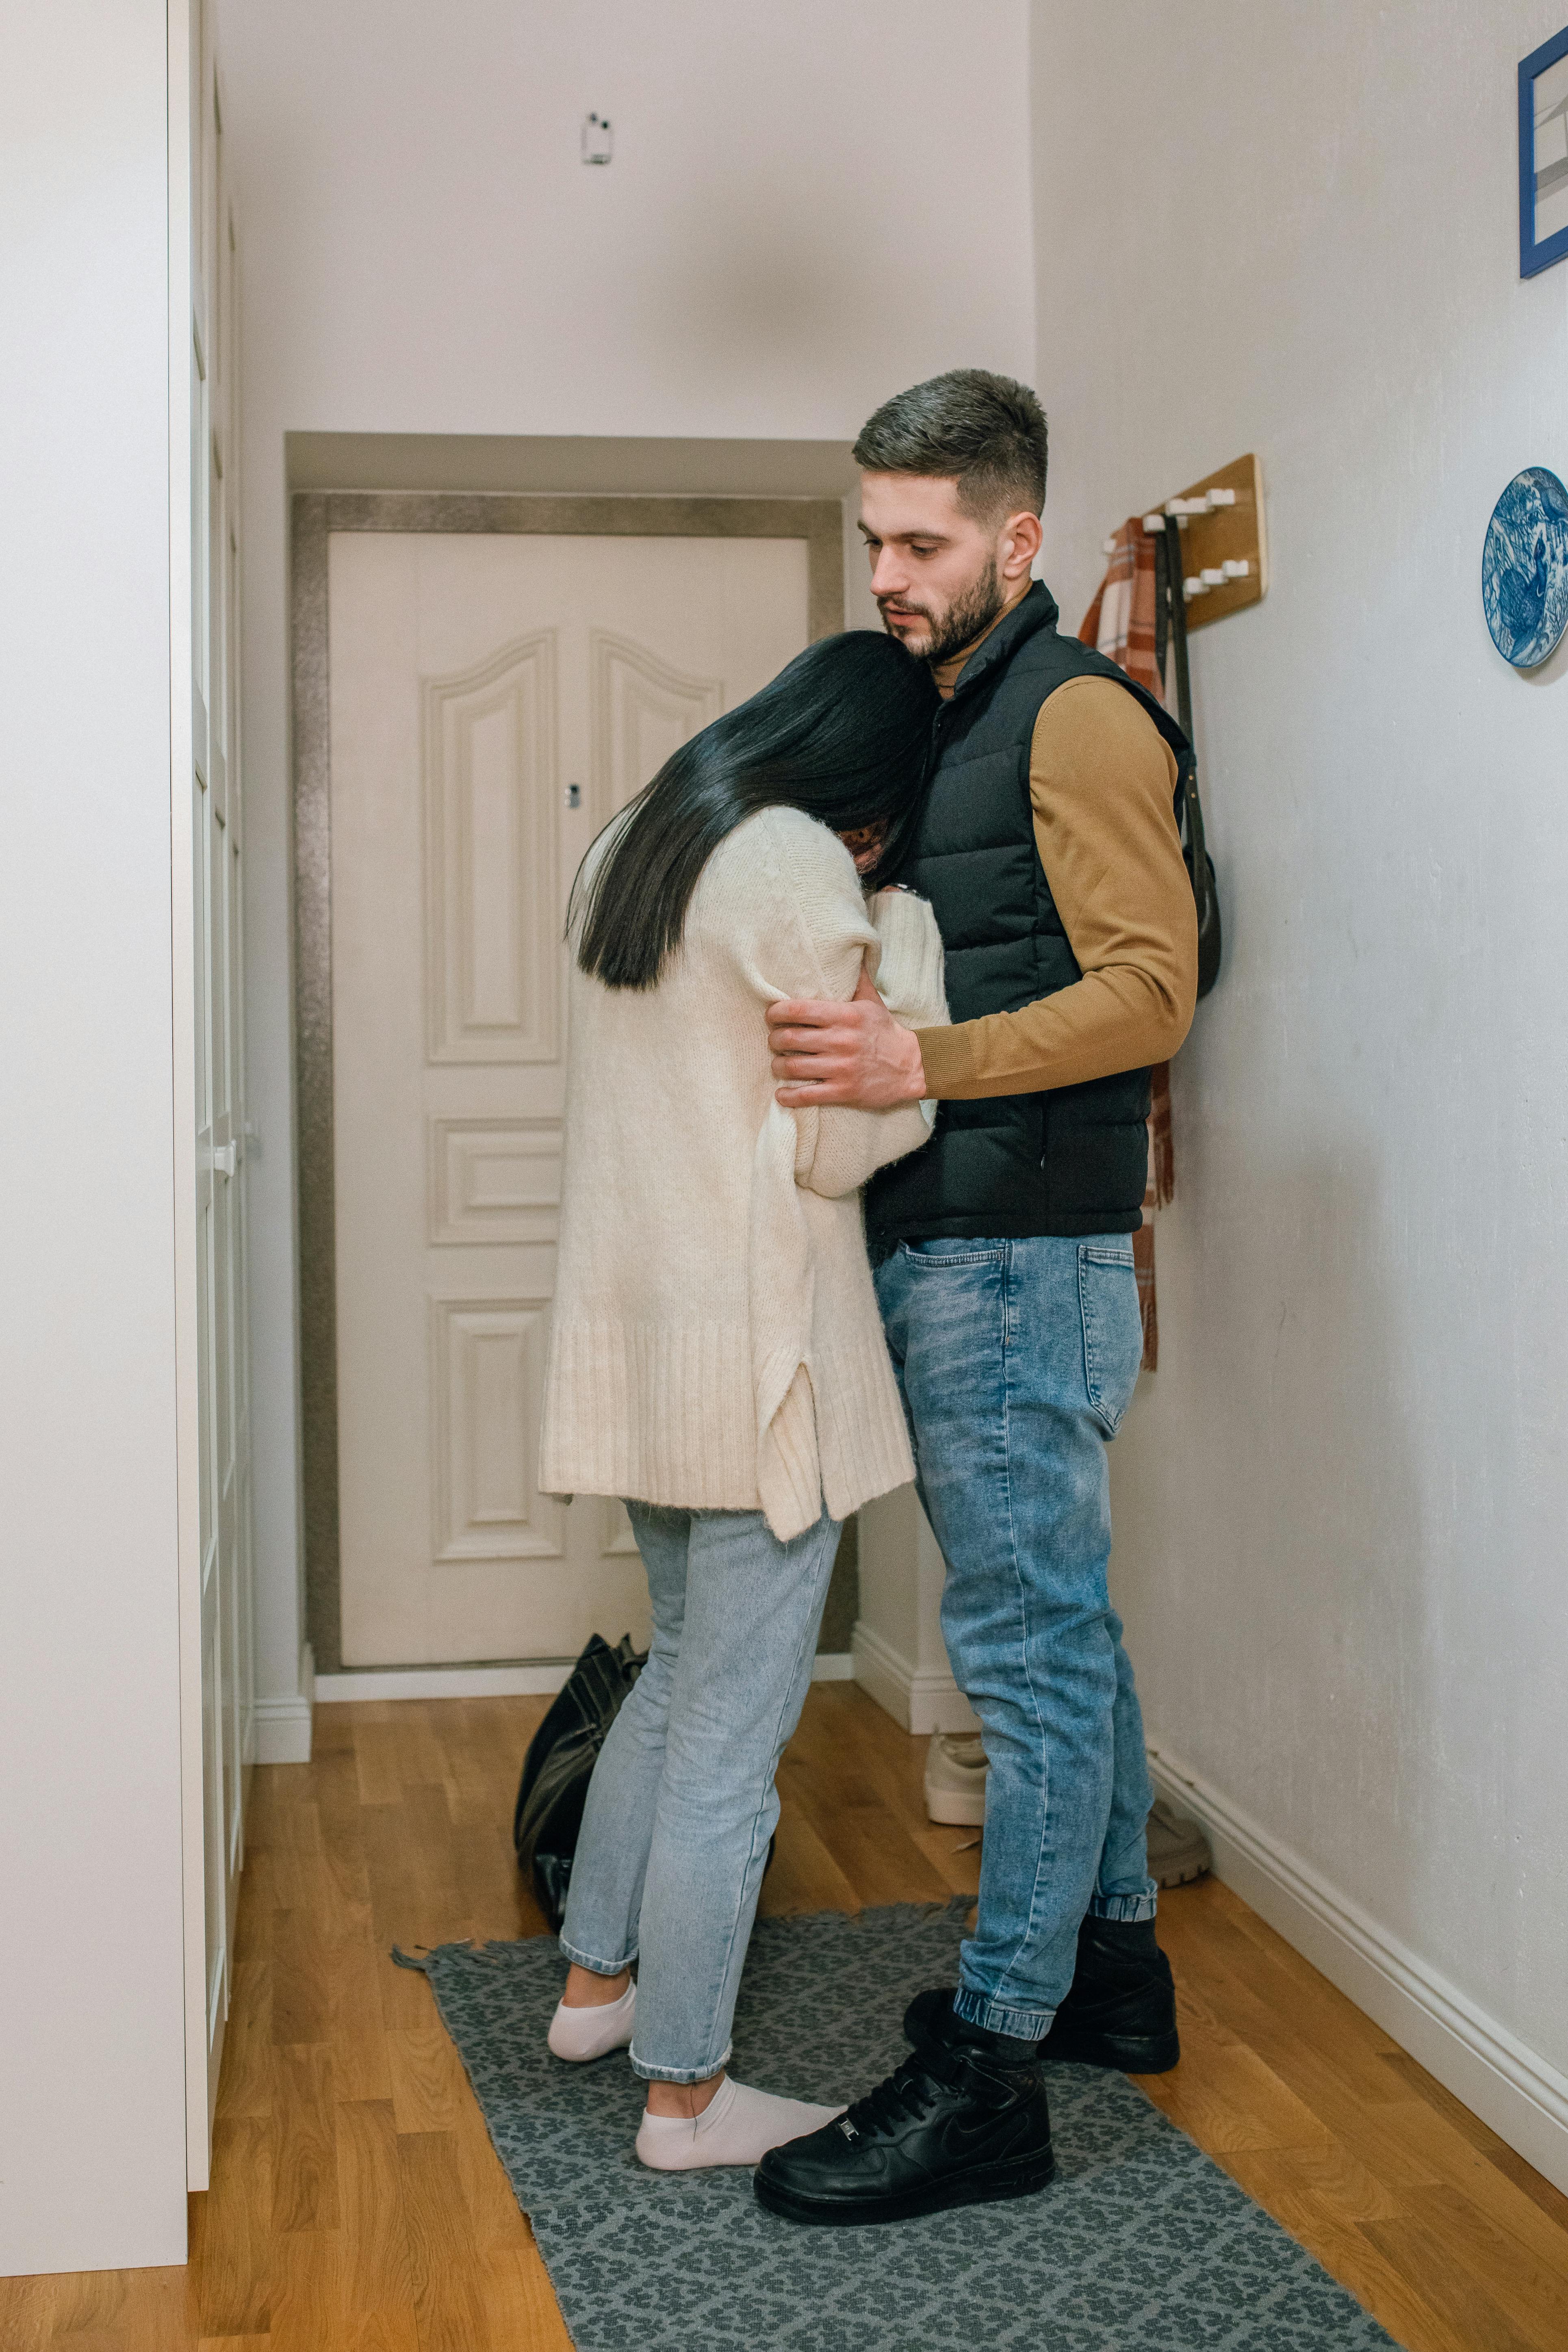 A man consoling an upset woman at the front door | Source: Pexels